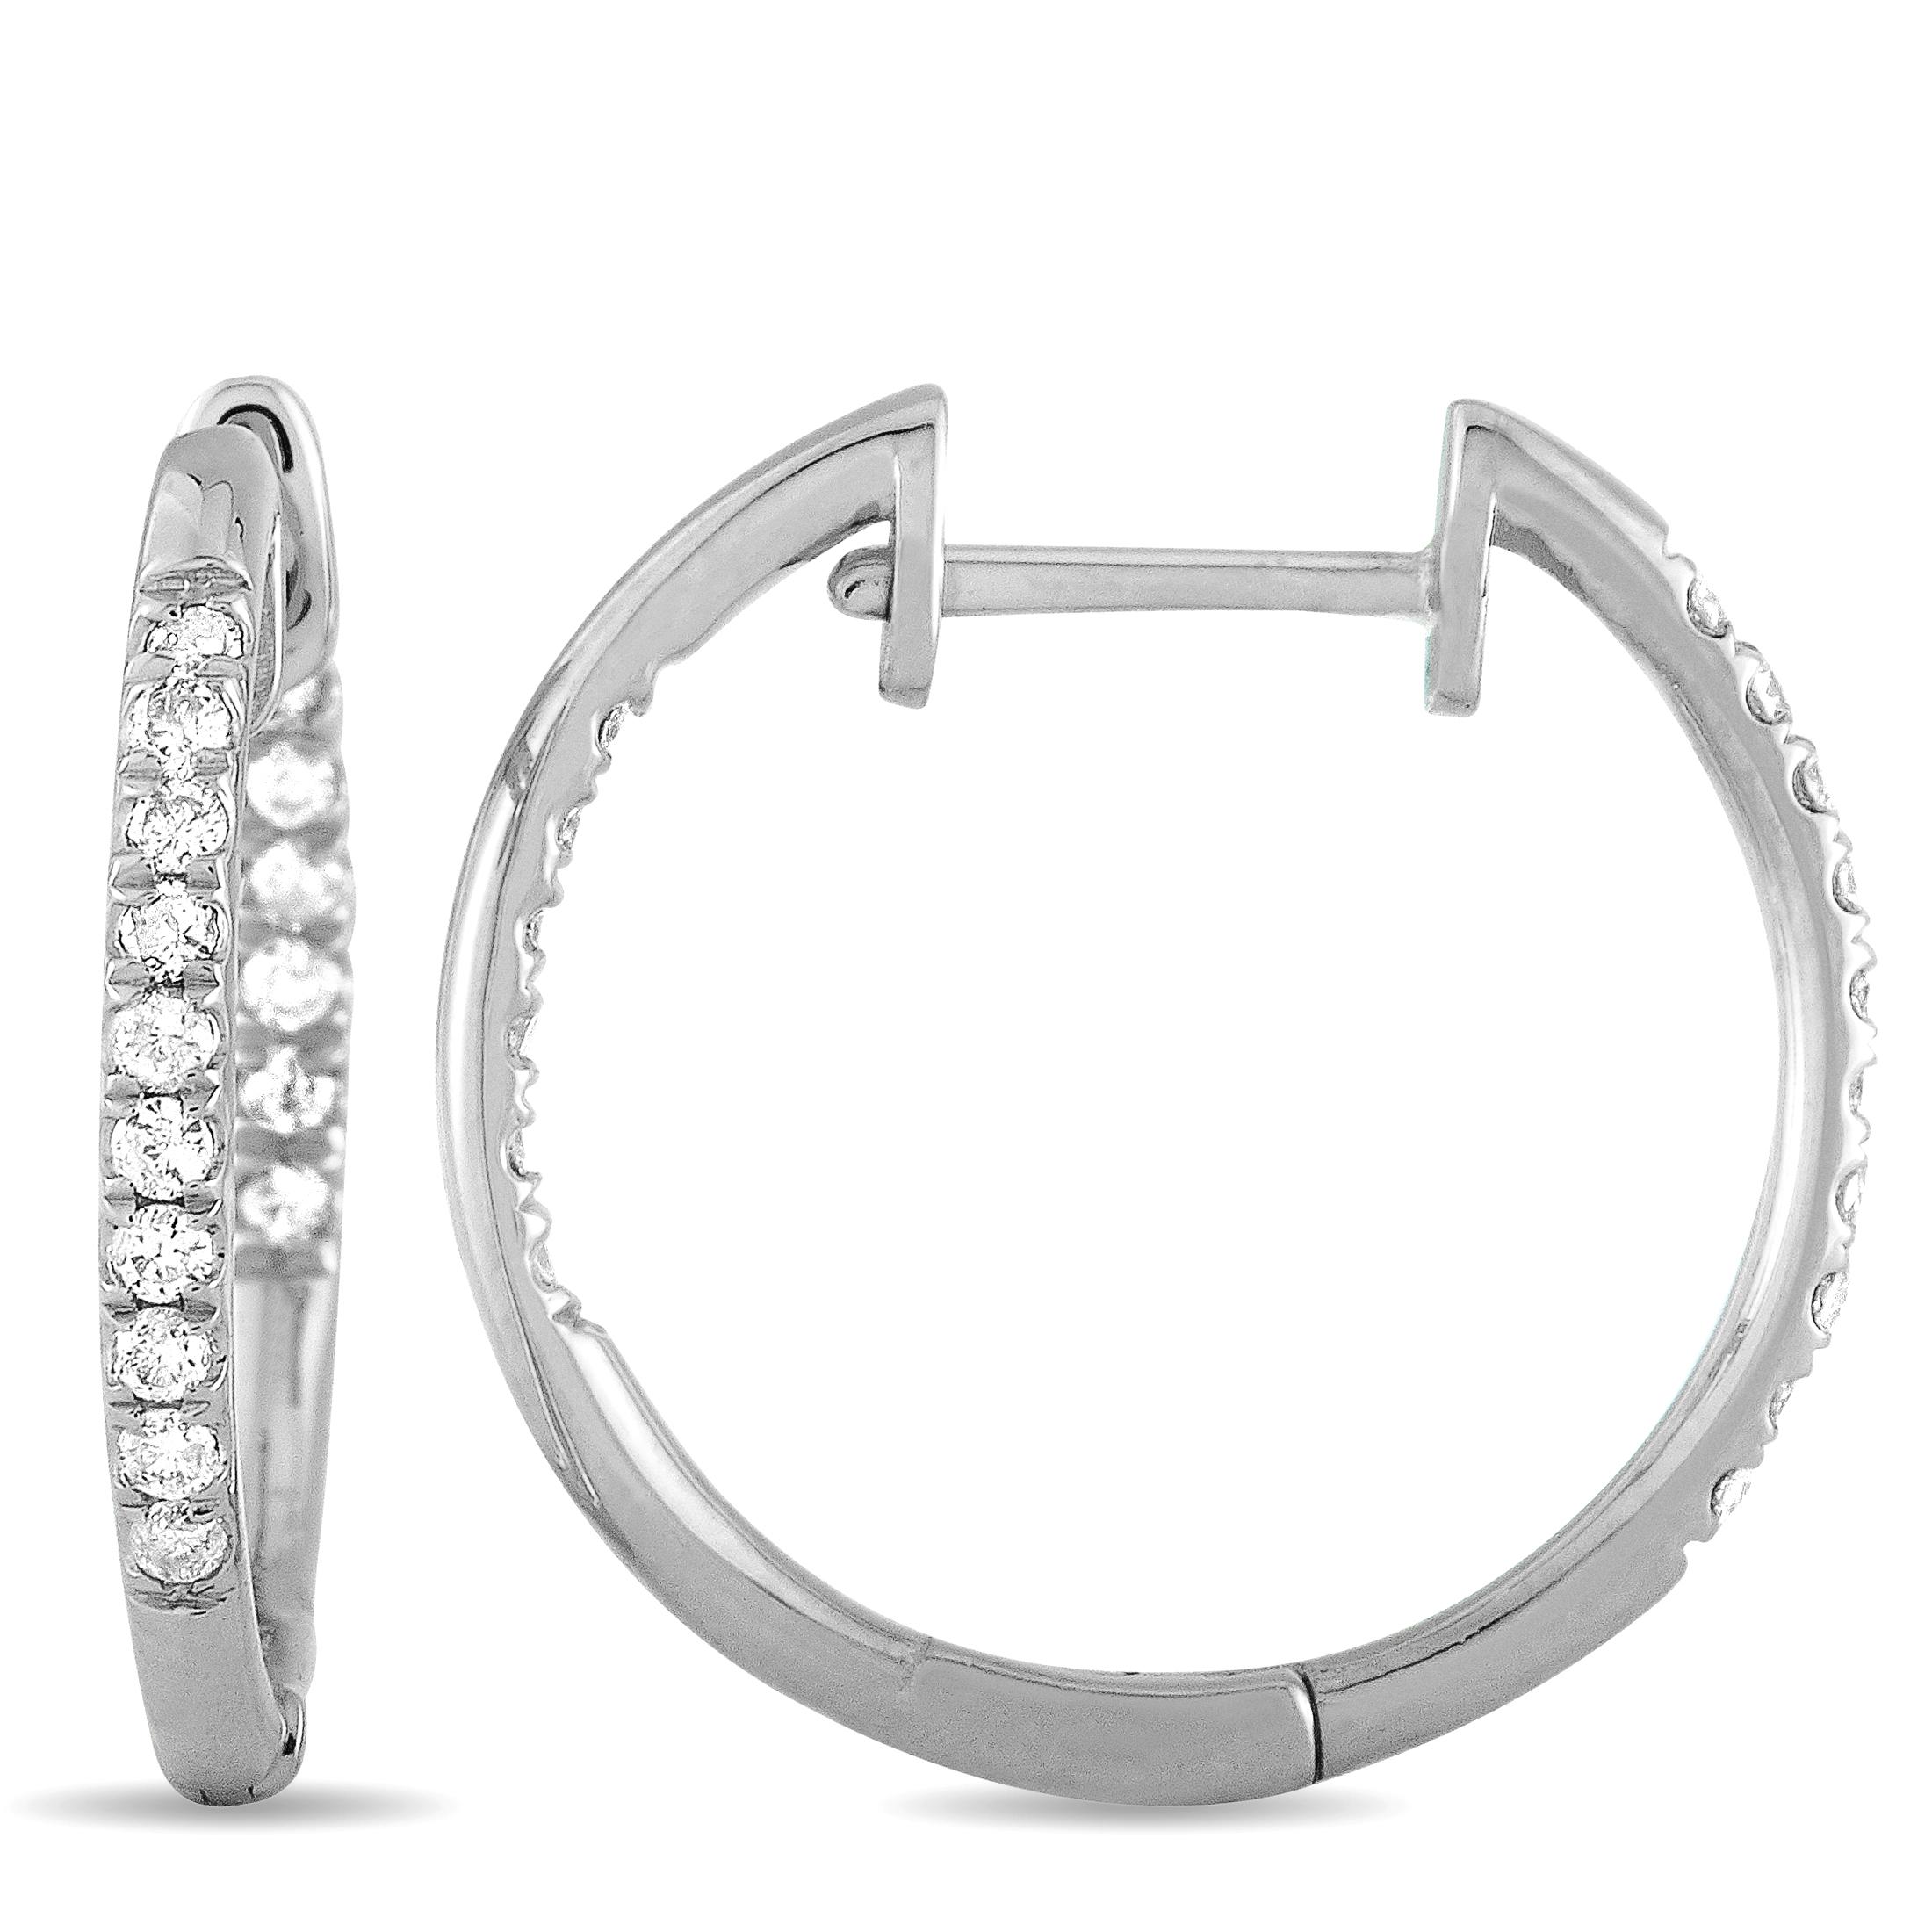 These LB Exclusive hoop earrings are made out of 14K white gold and diamonds that total 0.25 carats. The earrings measure 0.70” in length and 0.65” in width, and each of the two weighs 1.05 grams.
 
 The pair is offered in brand new condition and